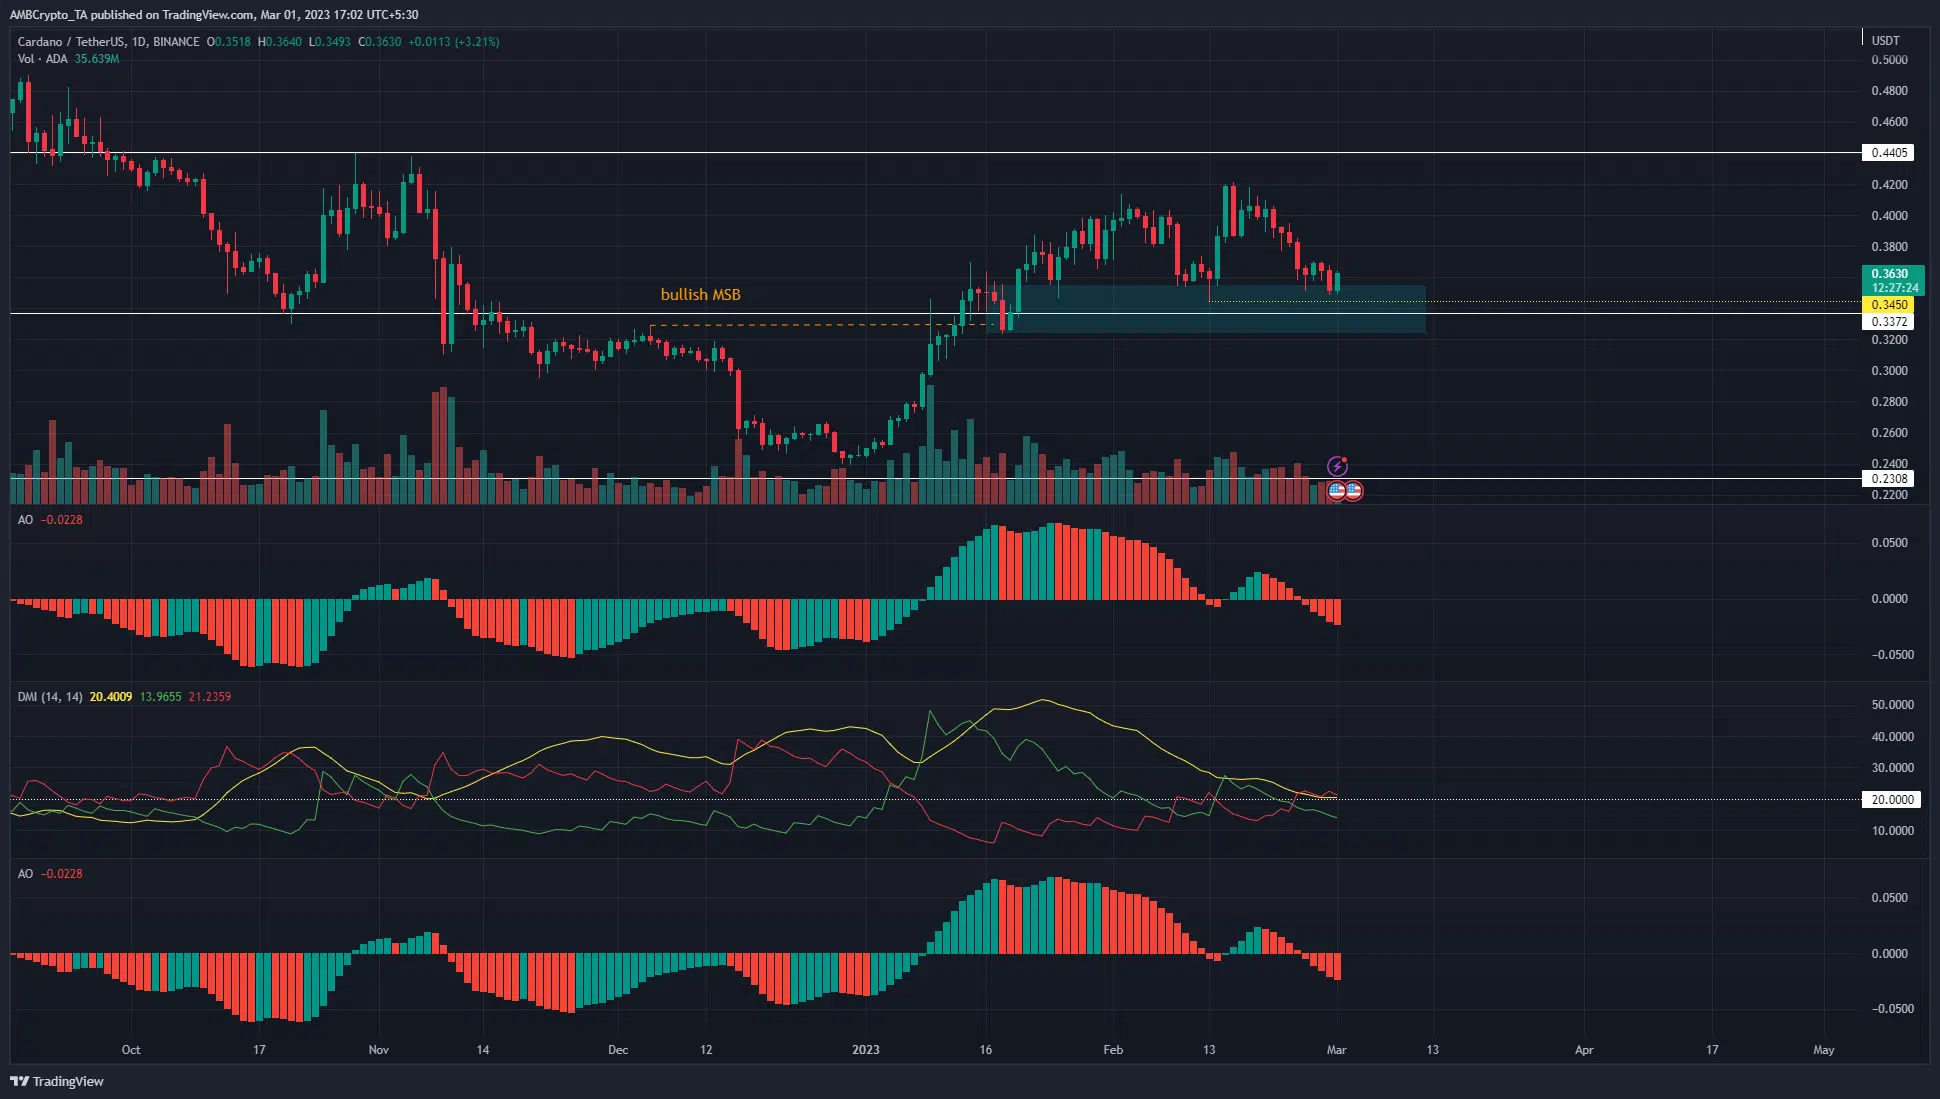 Cardano bulls still in control but their hold could be weakening